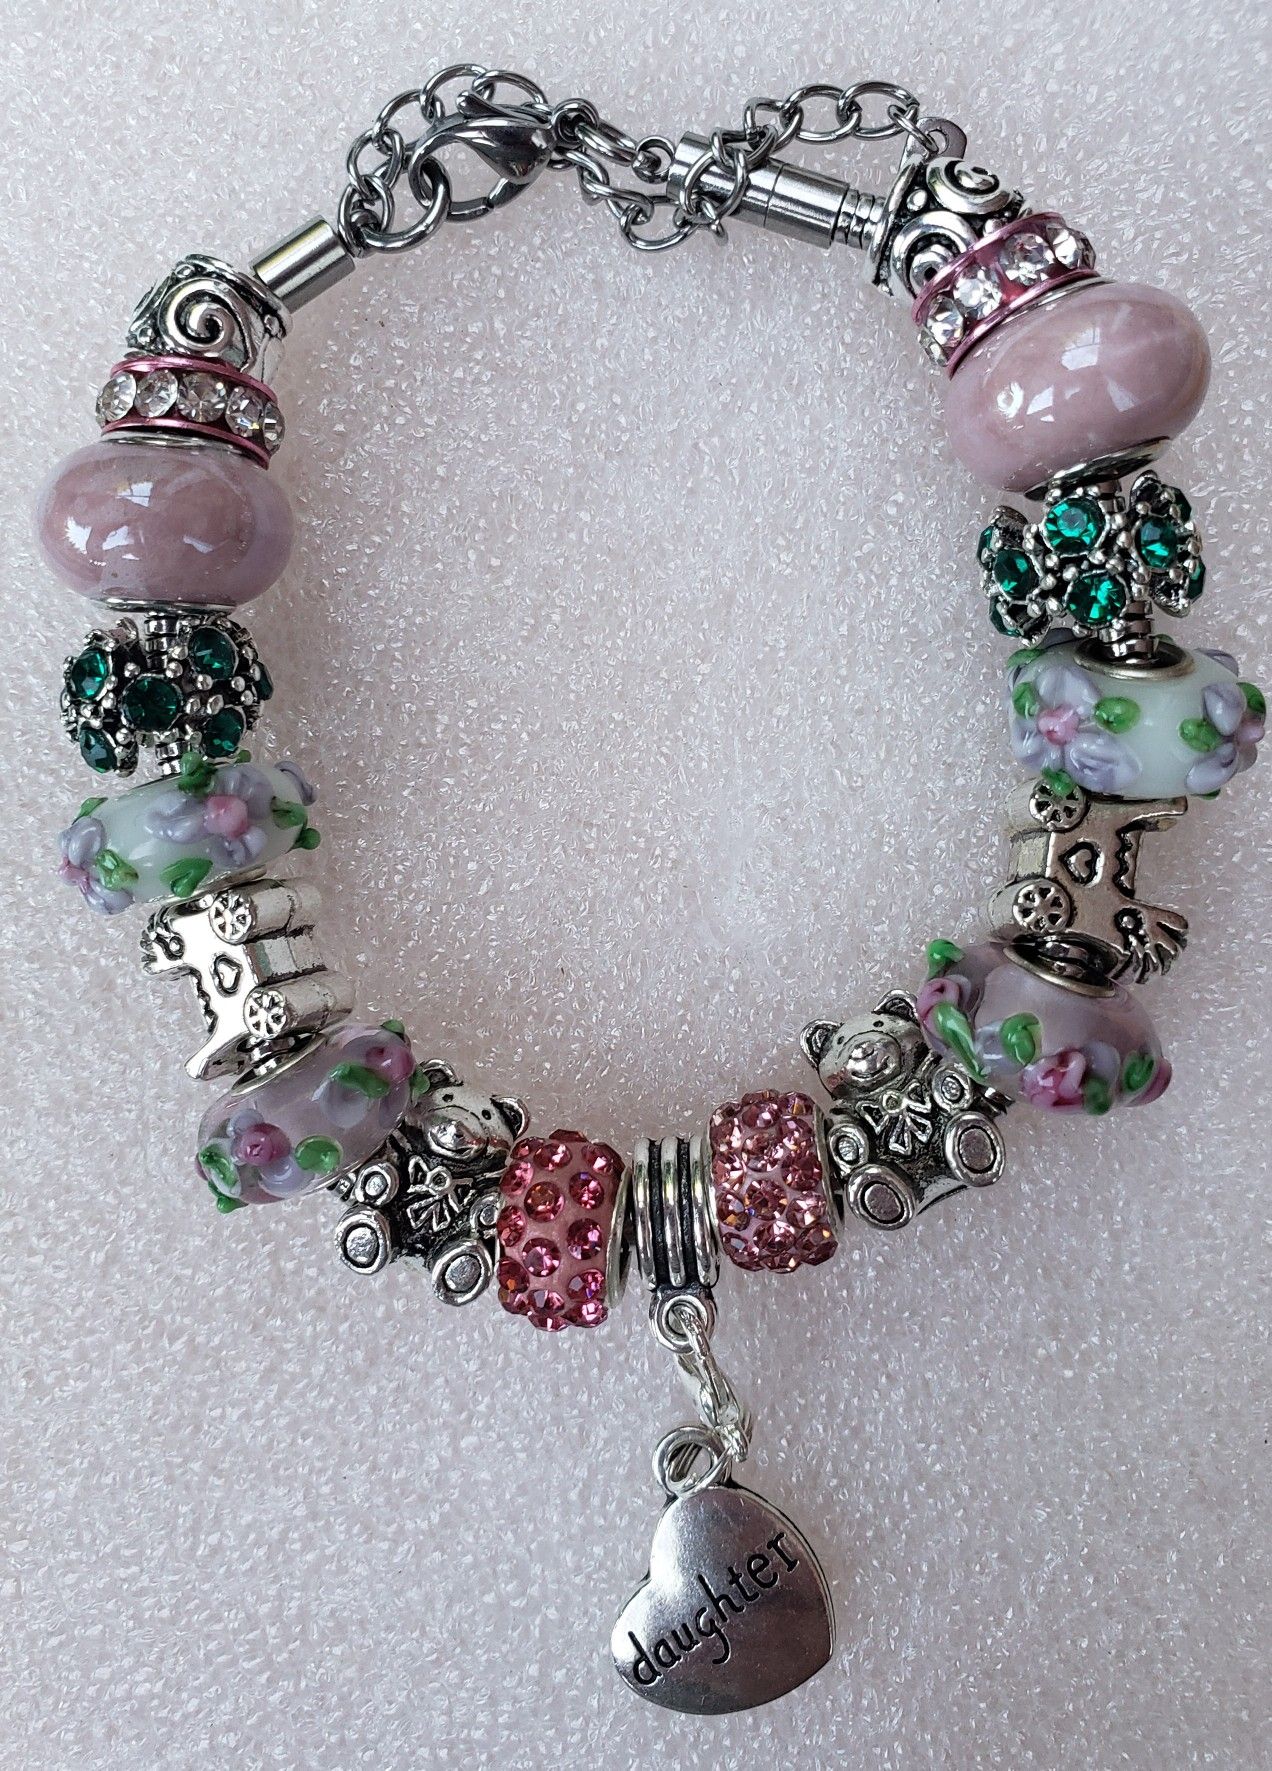 Baby girl mom to be charm bracelet 1 for $15 or 2 for $25